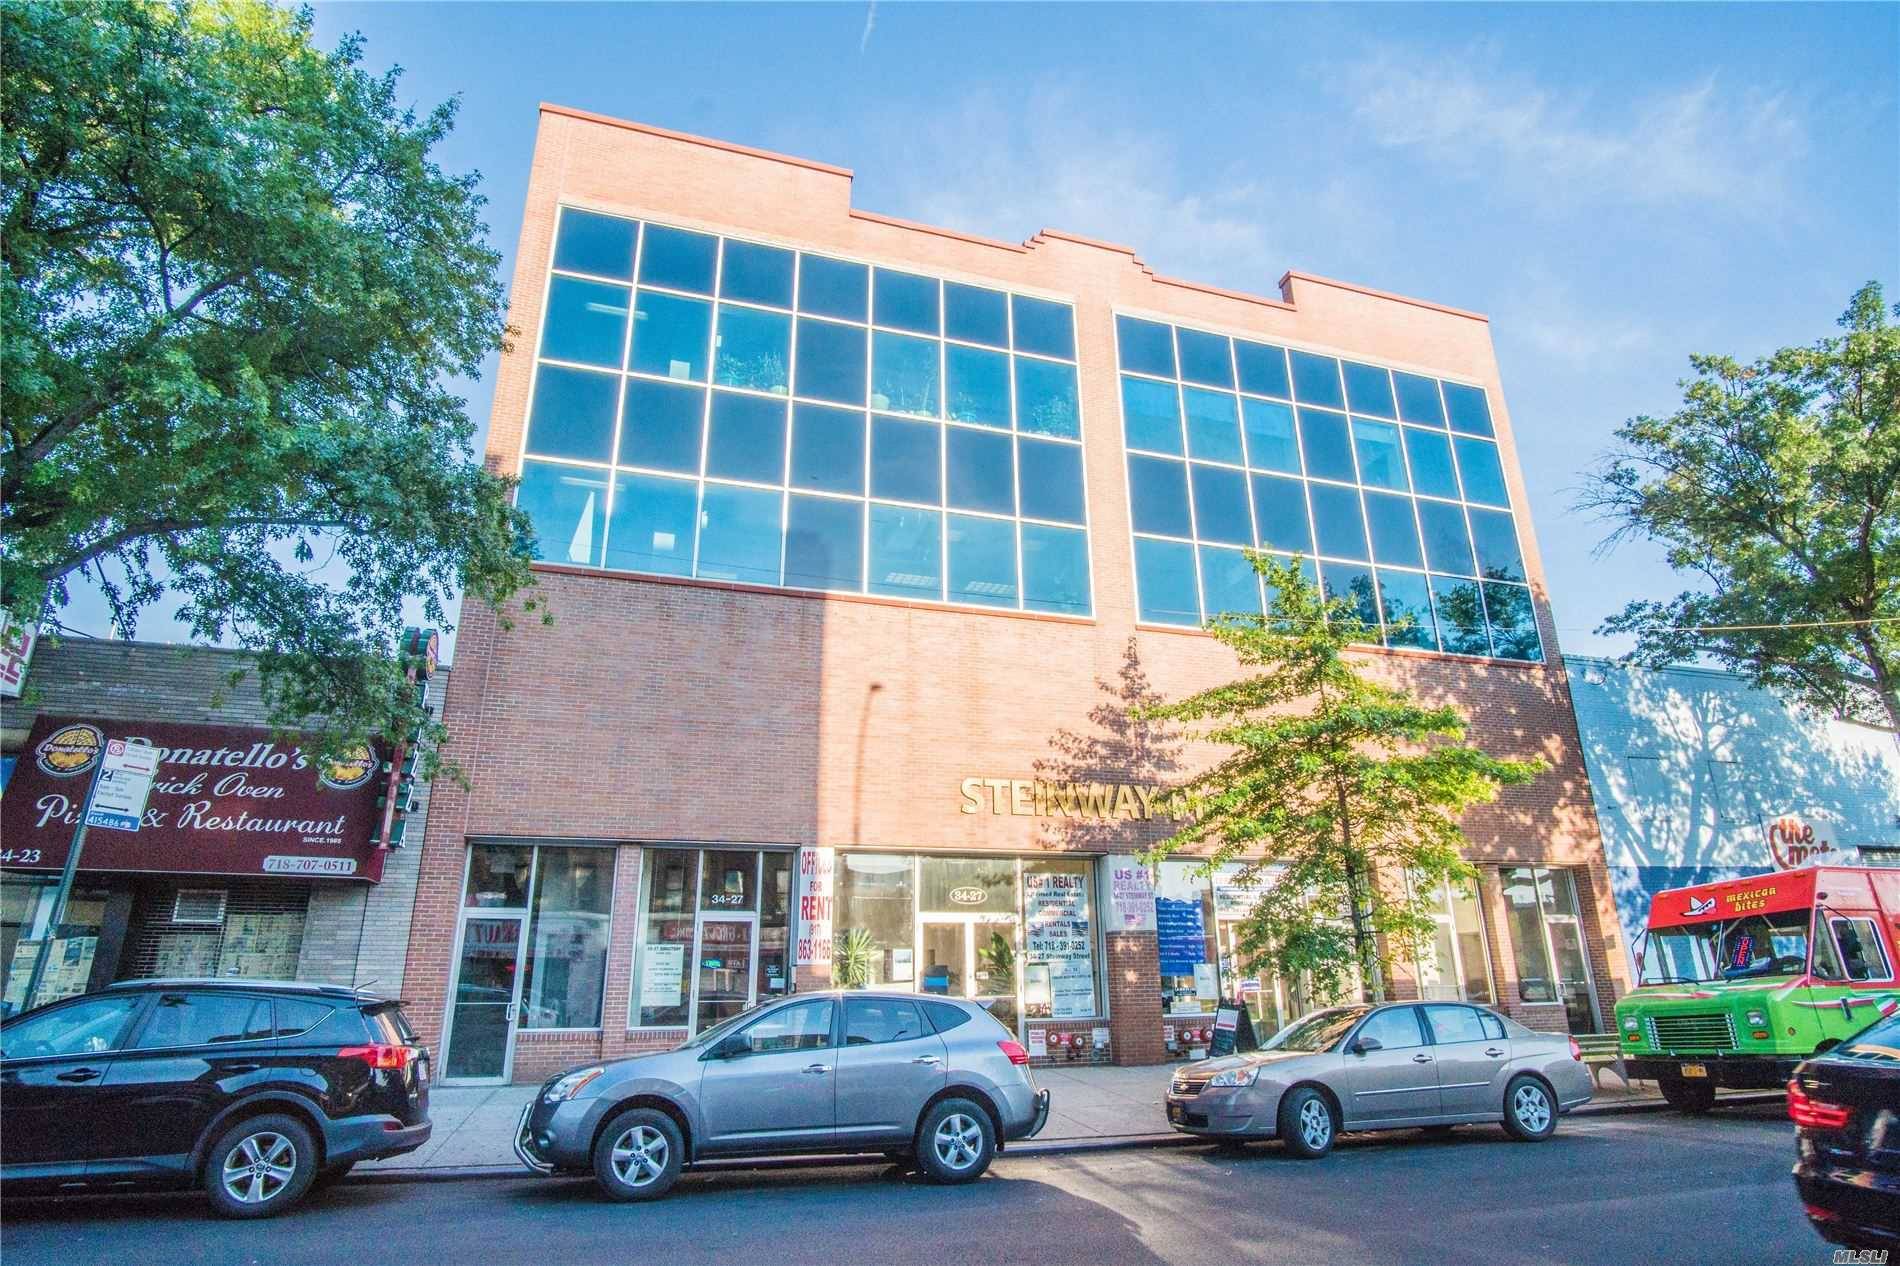 This is a package sale for two building located at 34 38 41st Street 34 27 29 Steinway Street, Long Island City, NY 11101.